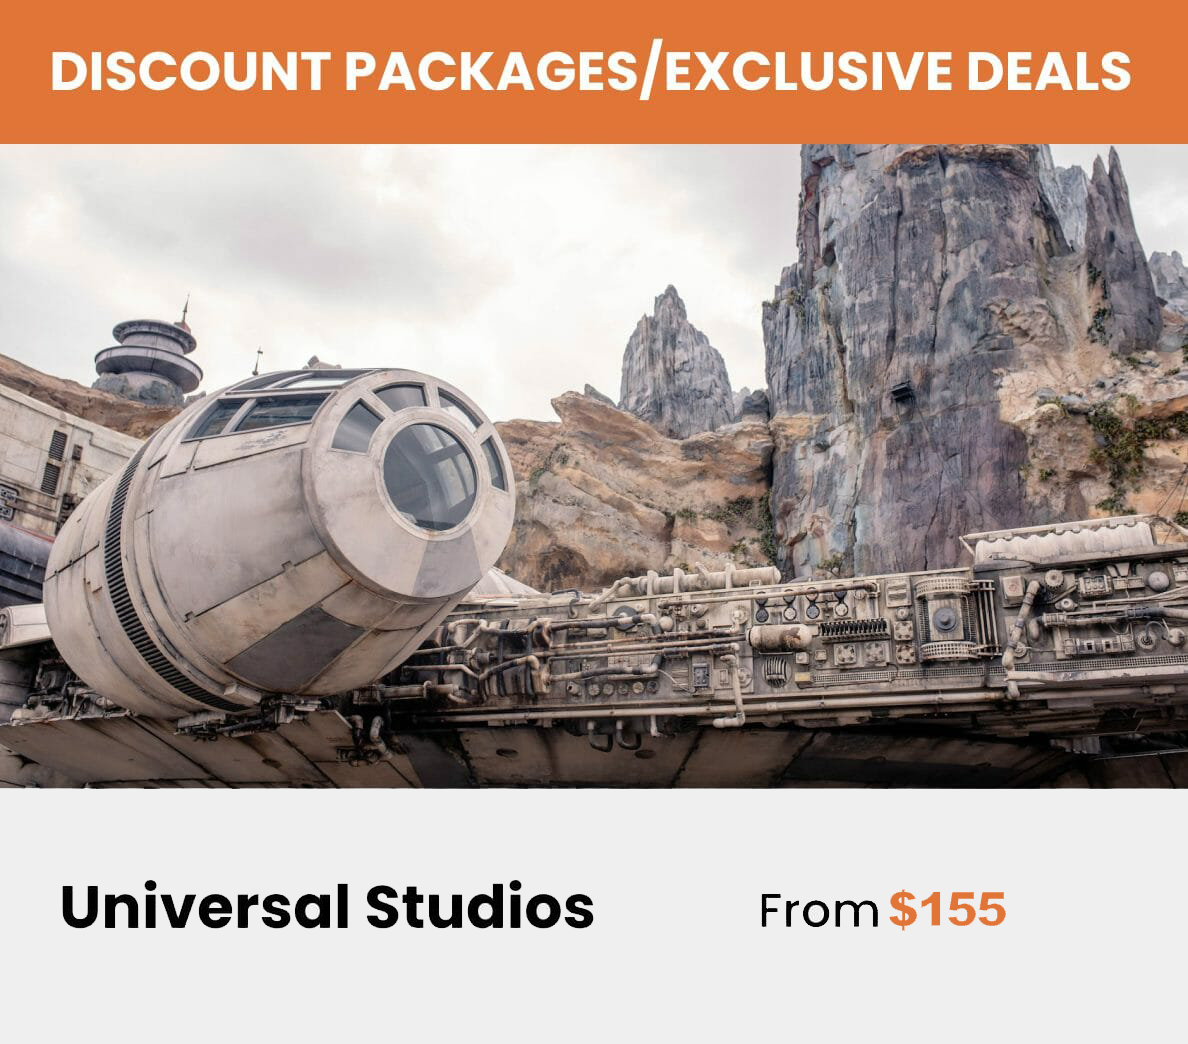 Universal Studios Discount Package and Exclusive Deals Orlandovacation.com